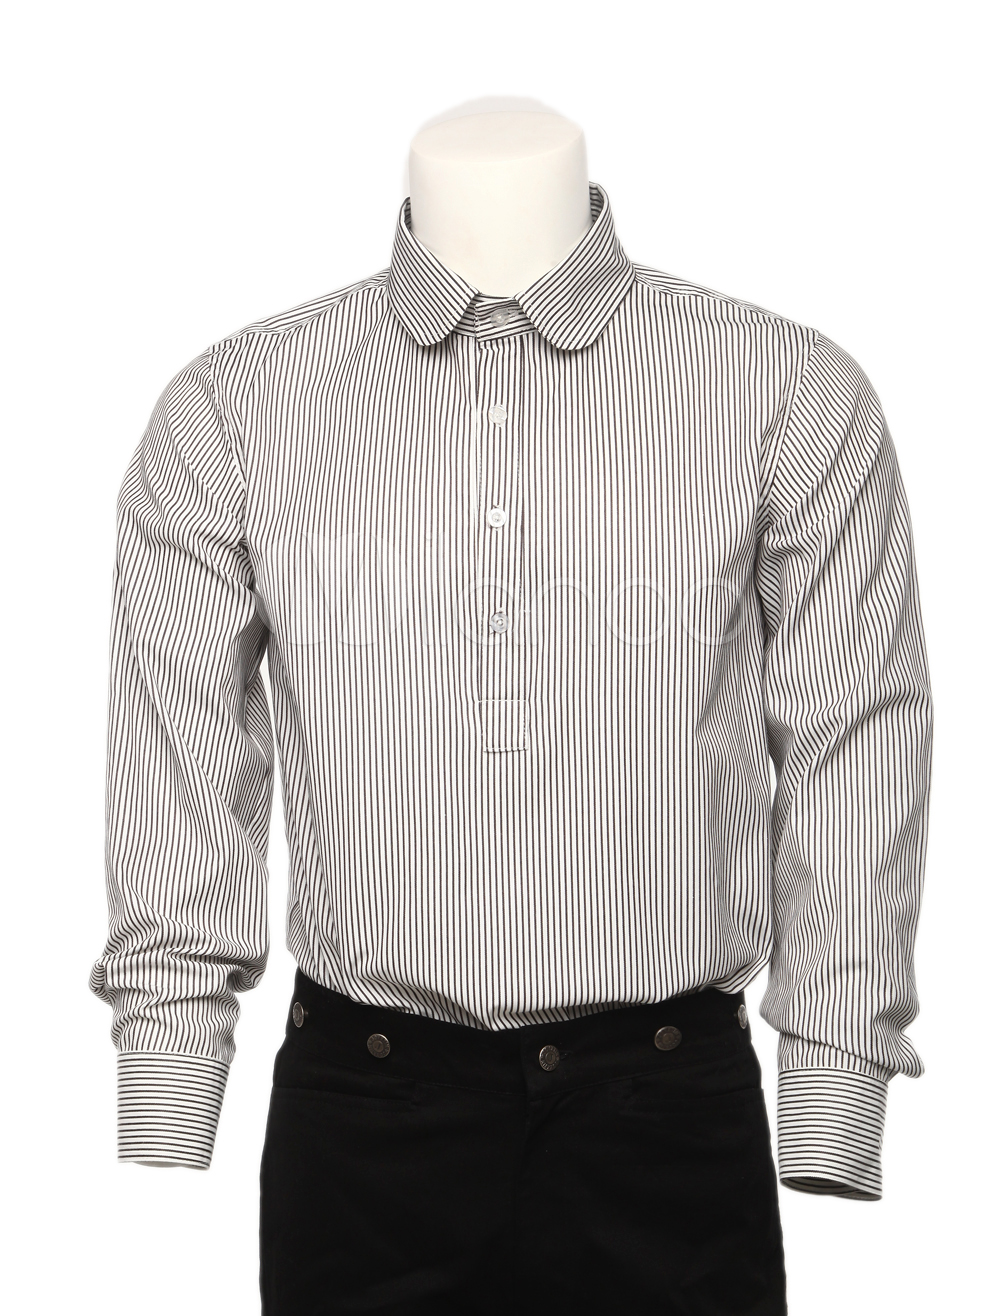 Cool White Black Strips Cotton Long Sleeves Steampunk Shirt For Men steampunk buy now online